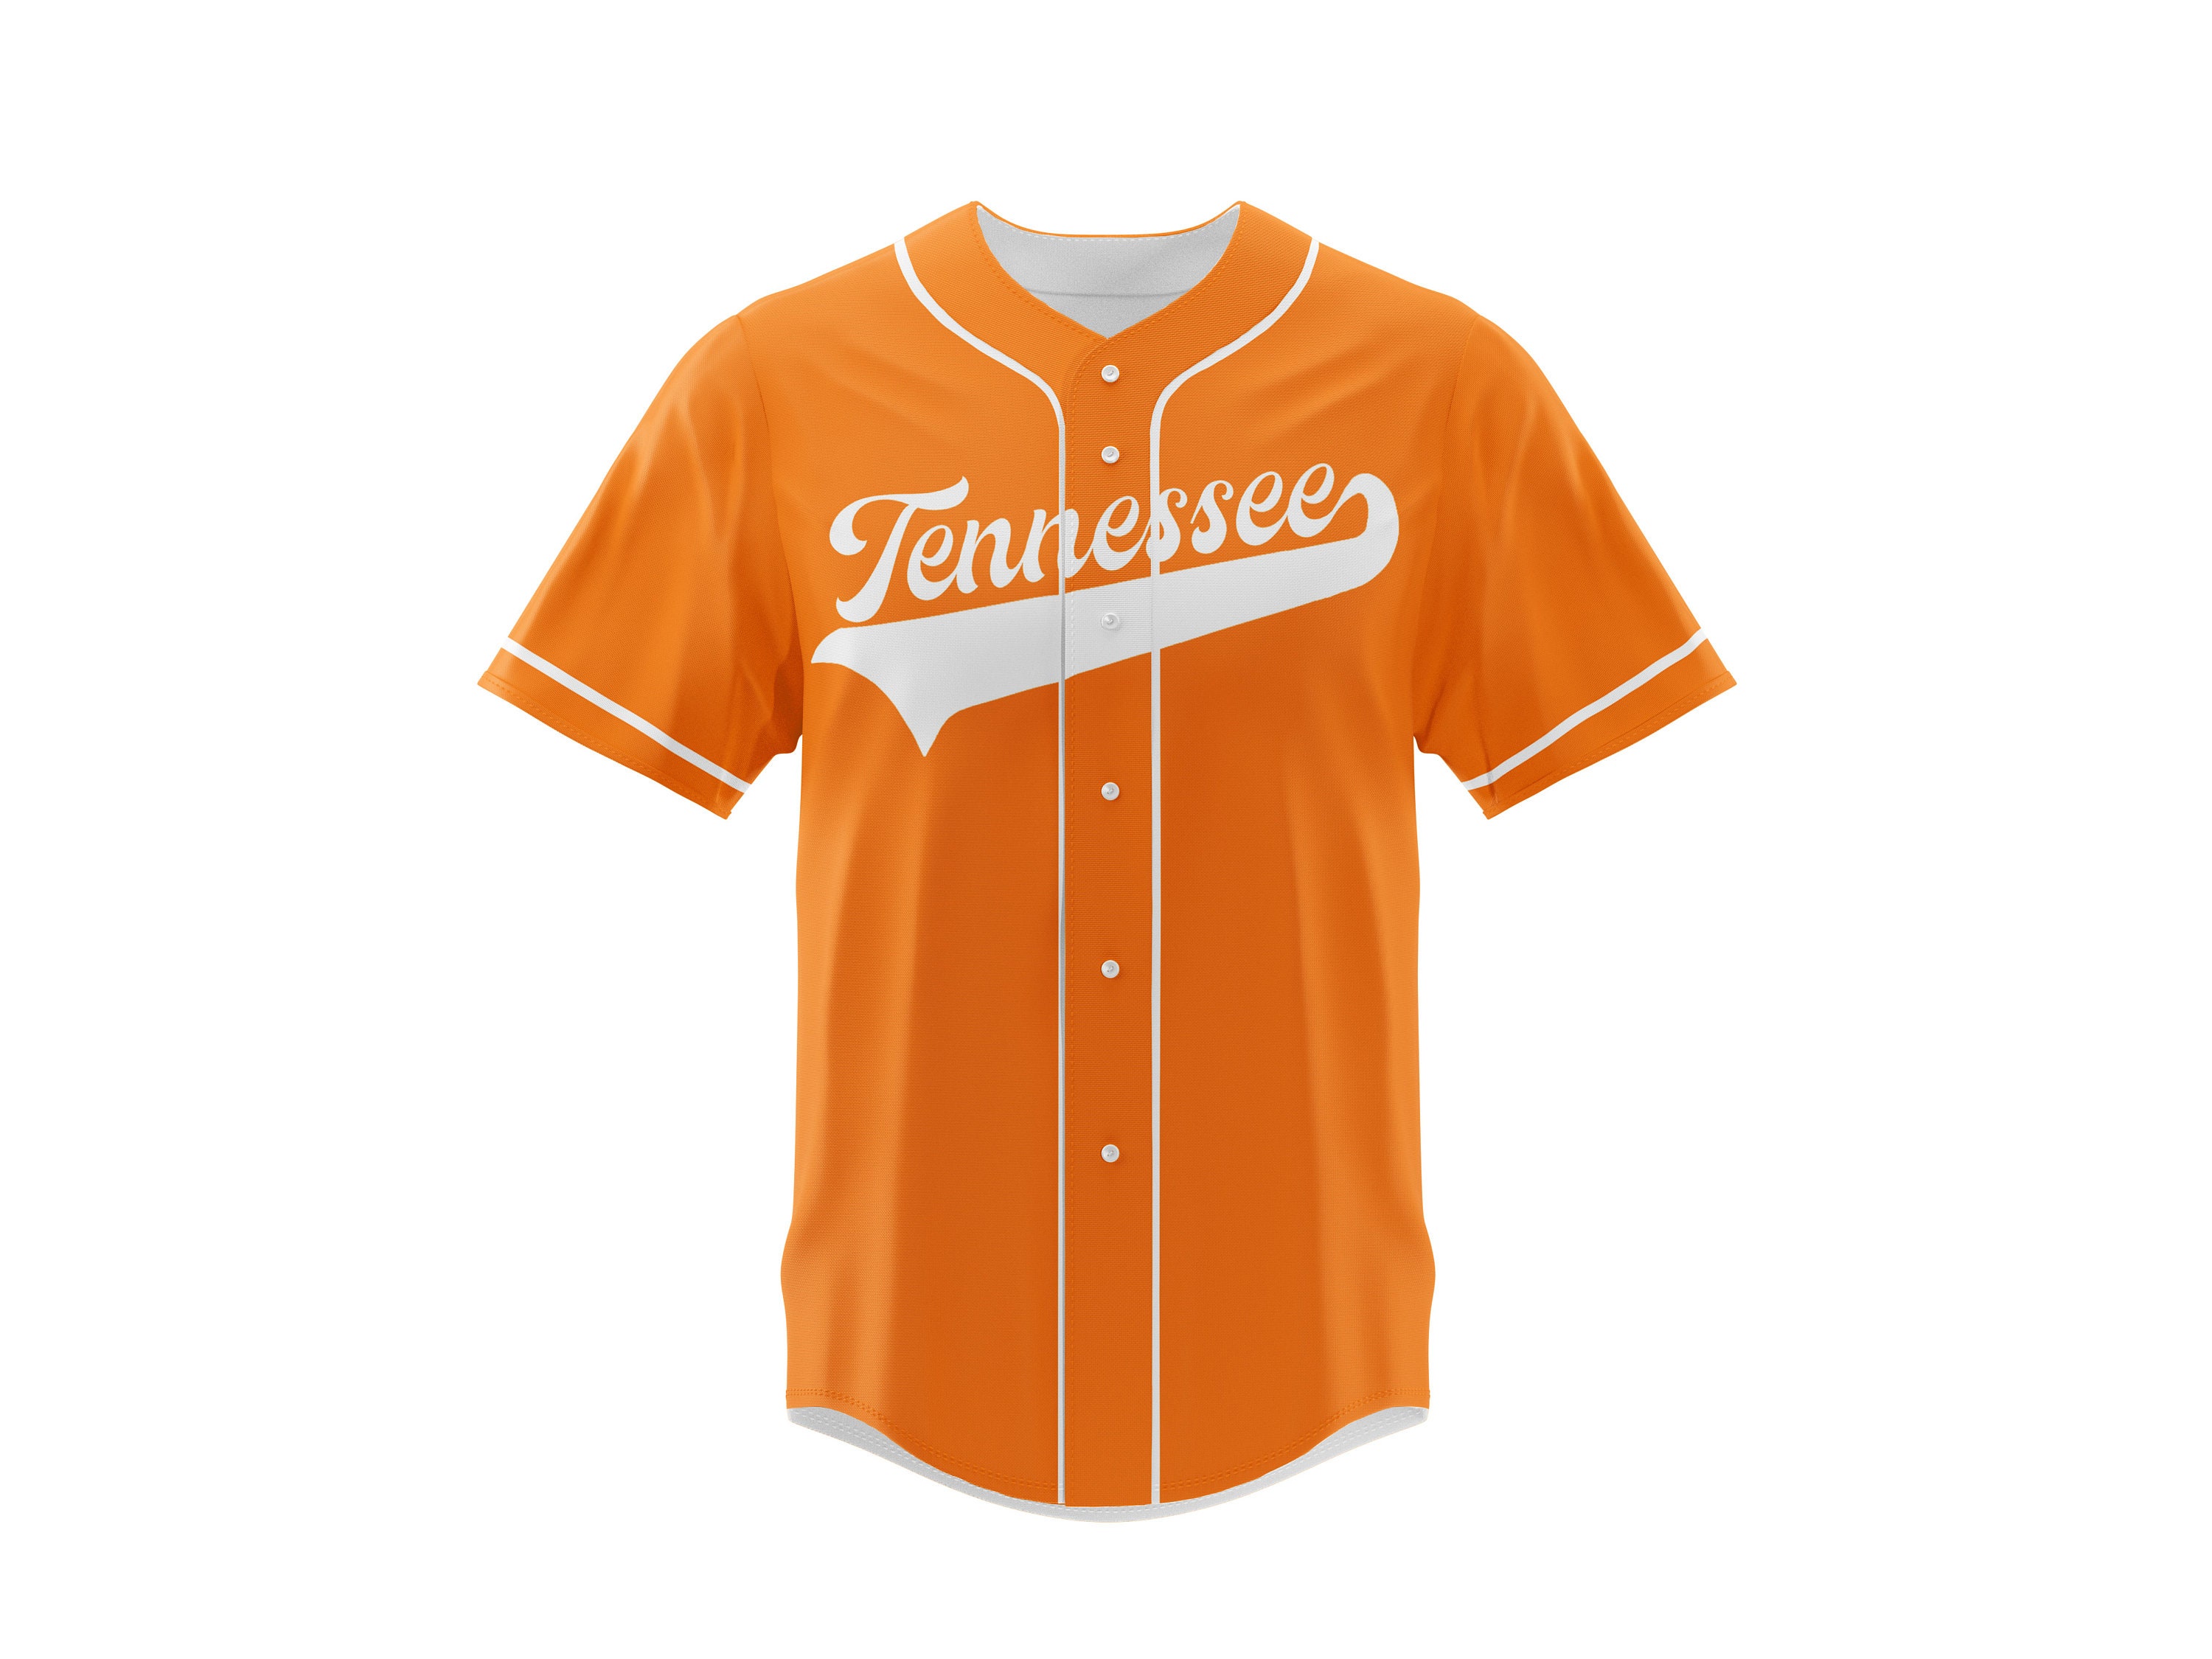 Buy Tennessee Collegiate Baseball Jersey Fully Customizable Online in India  